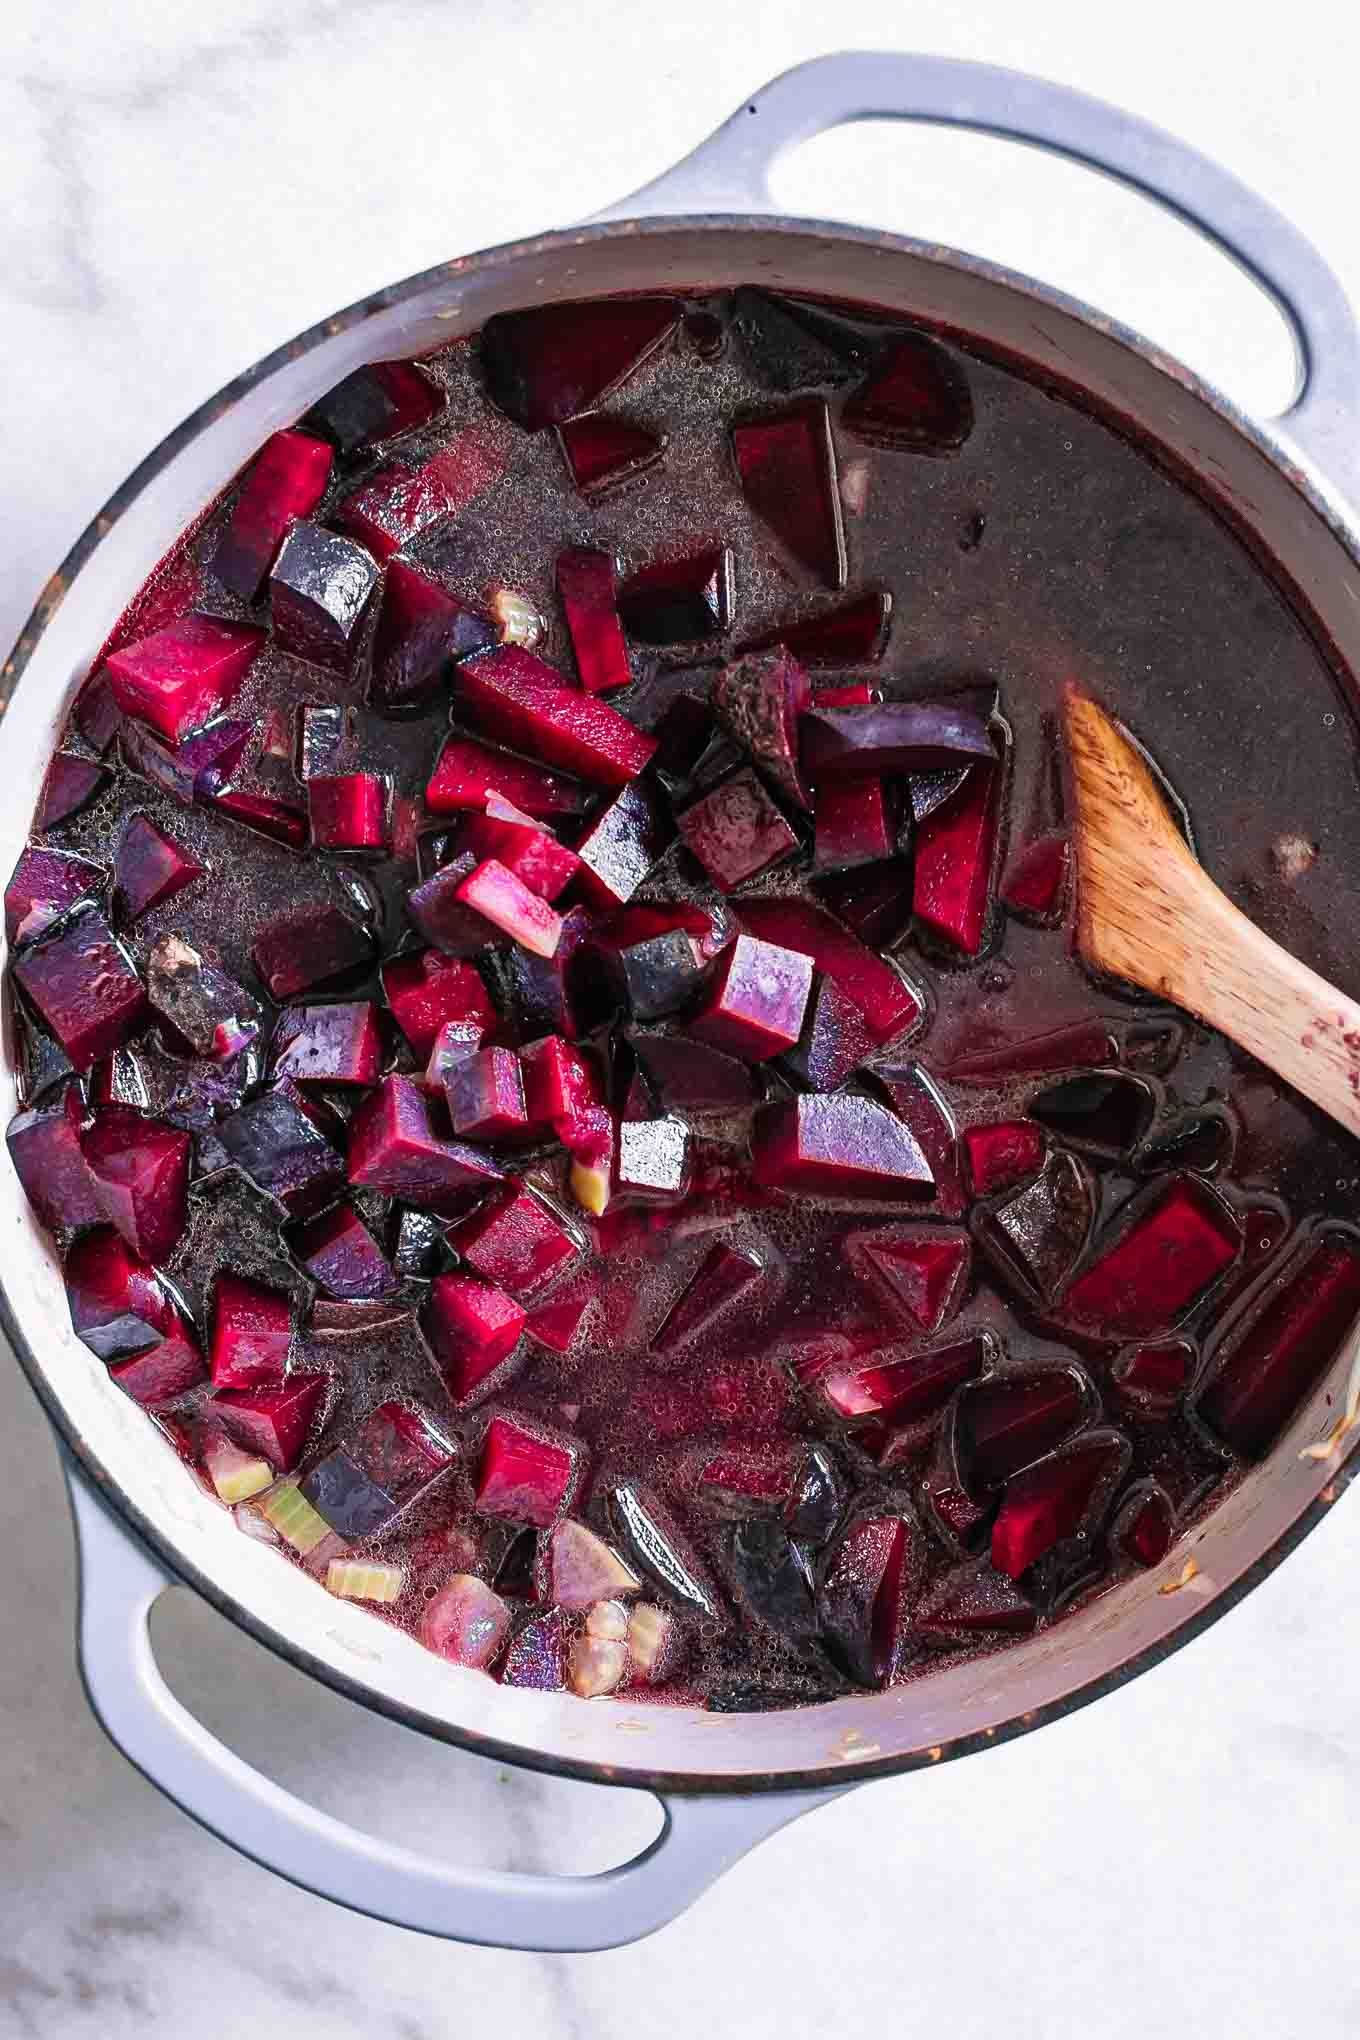 a pot of soup with broth and red beets and a wooden spoon